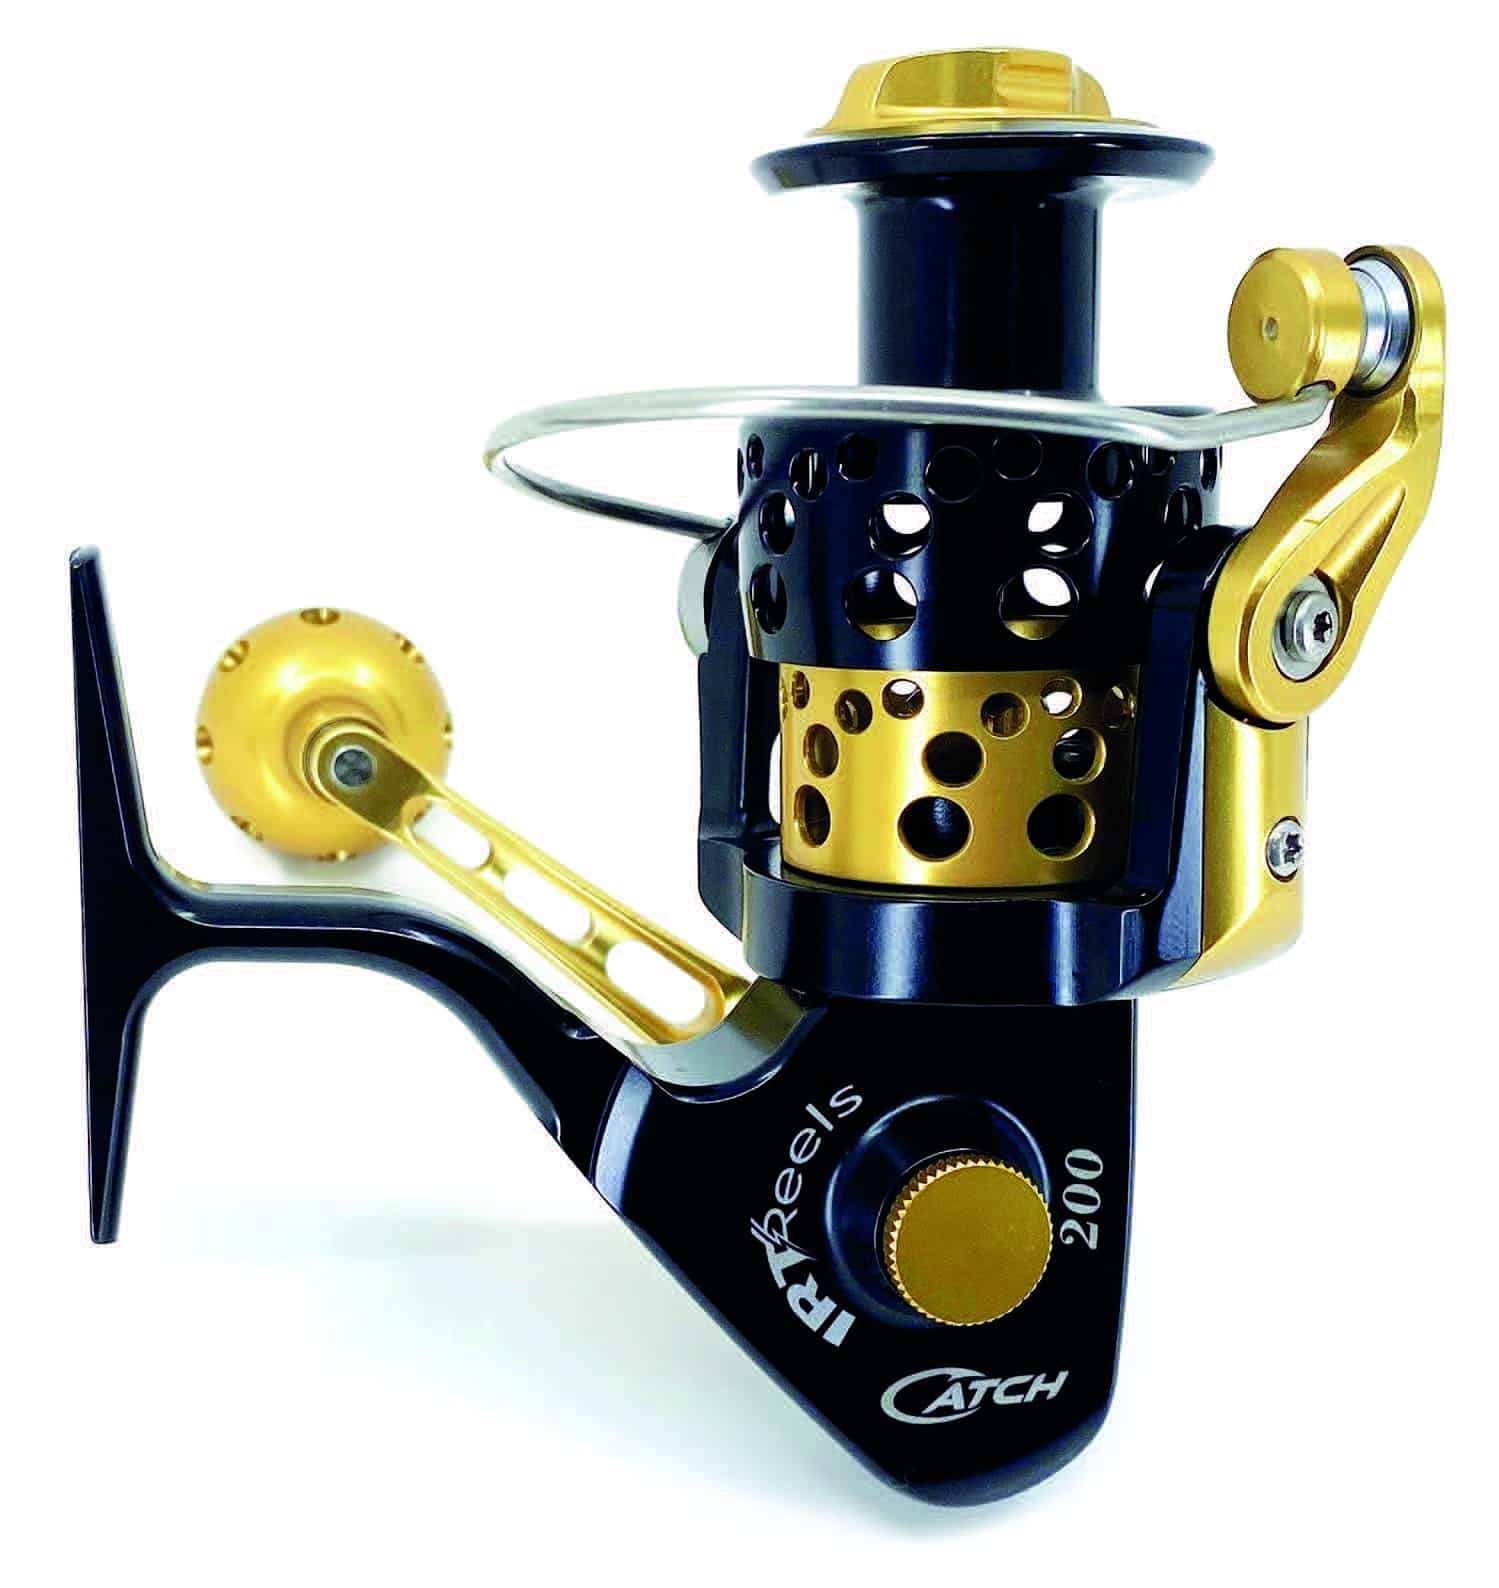 CATCH IRT200 Spinning Reel, CLICK HERE